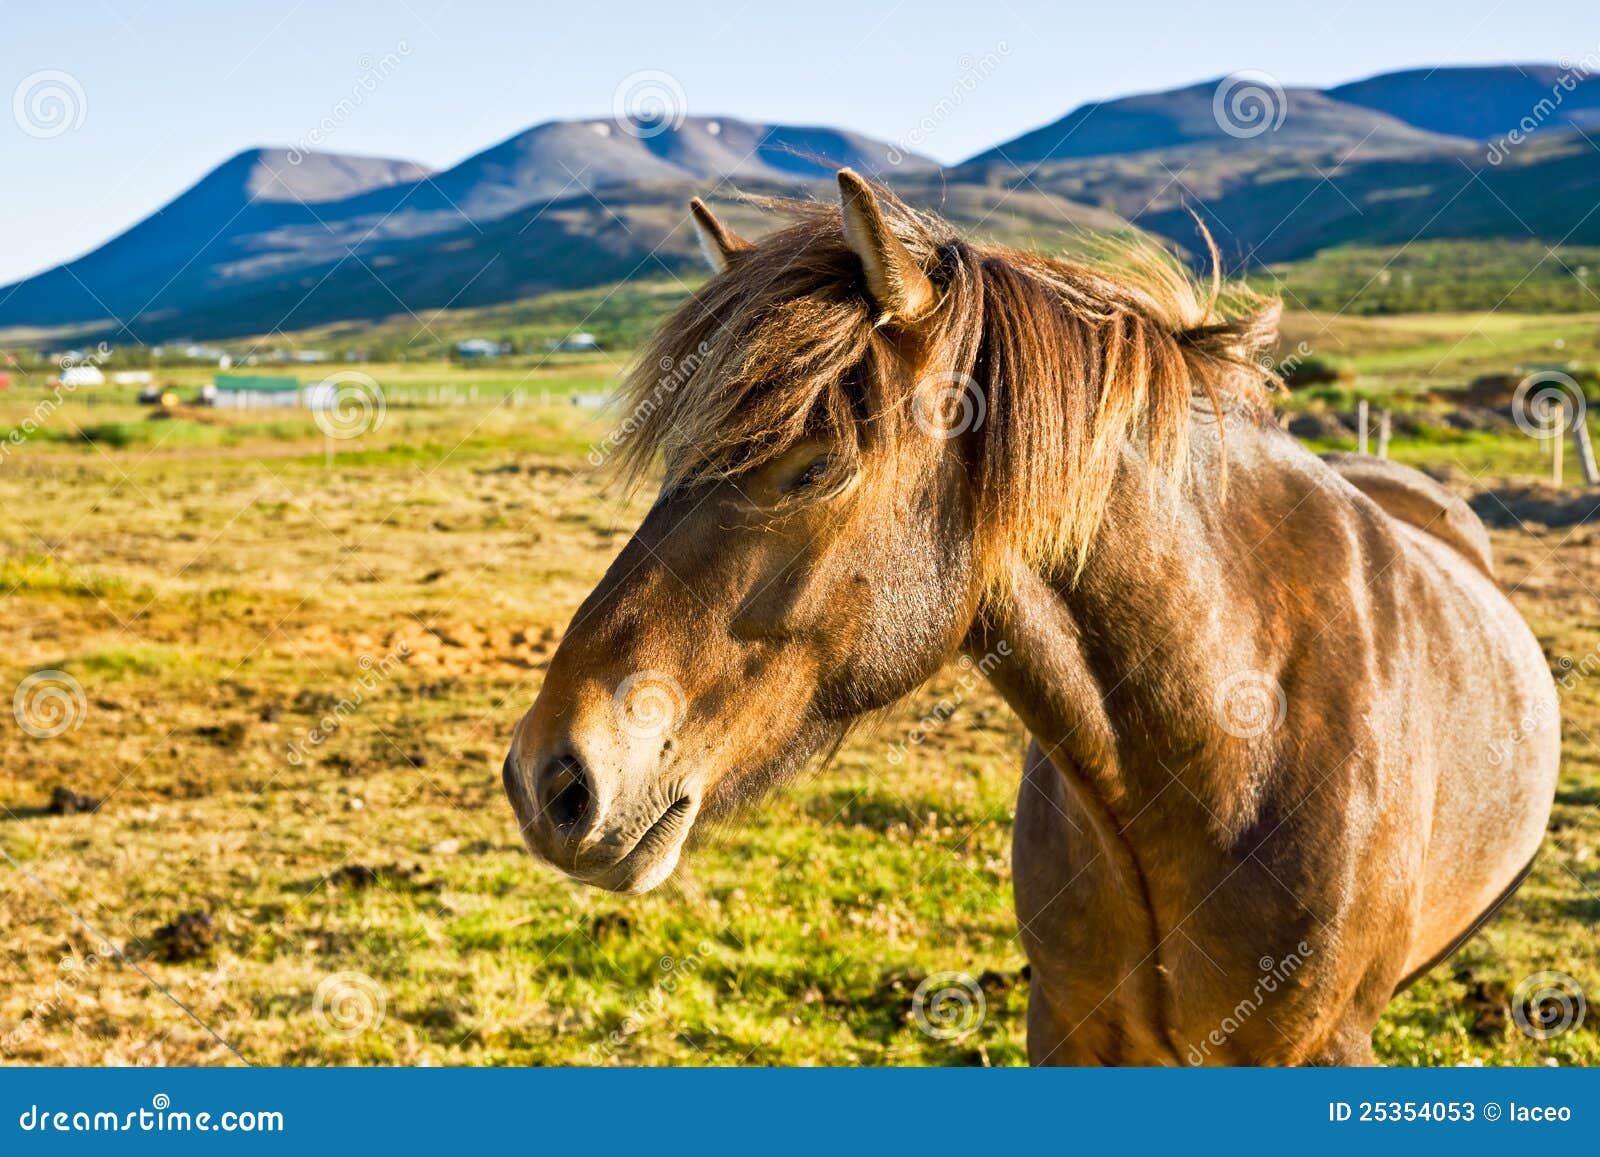 icelandic horse in a farm late evening.